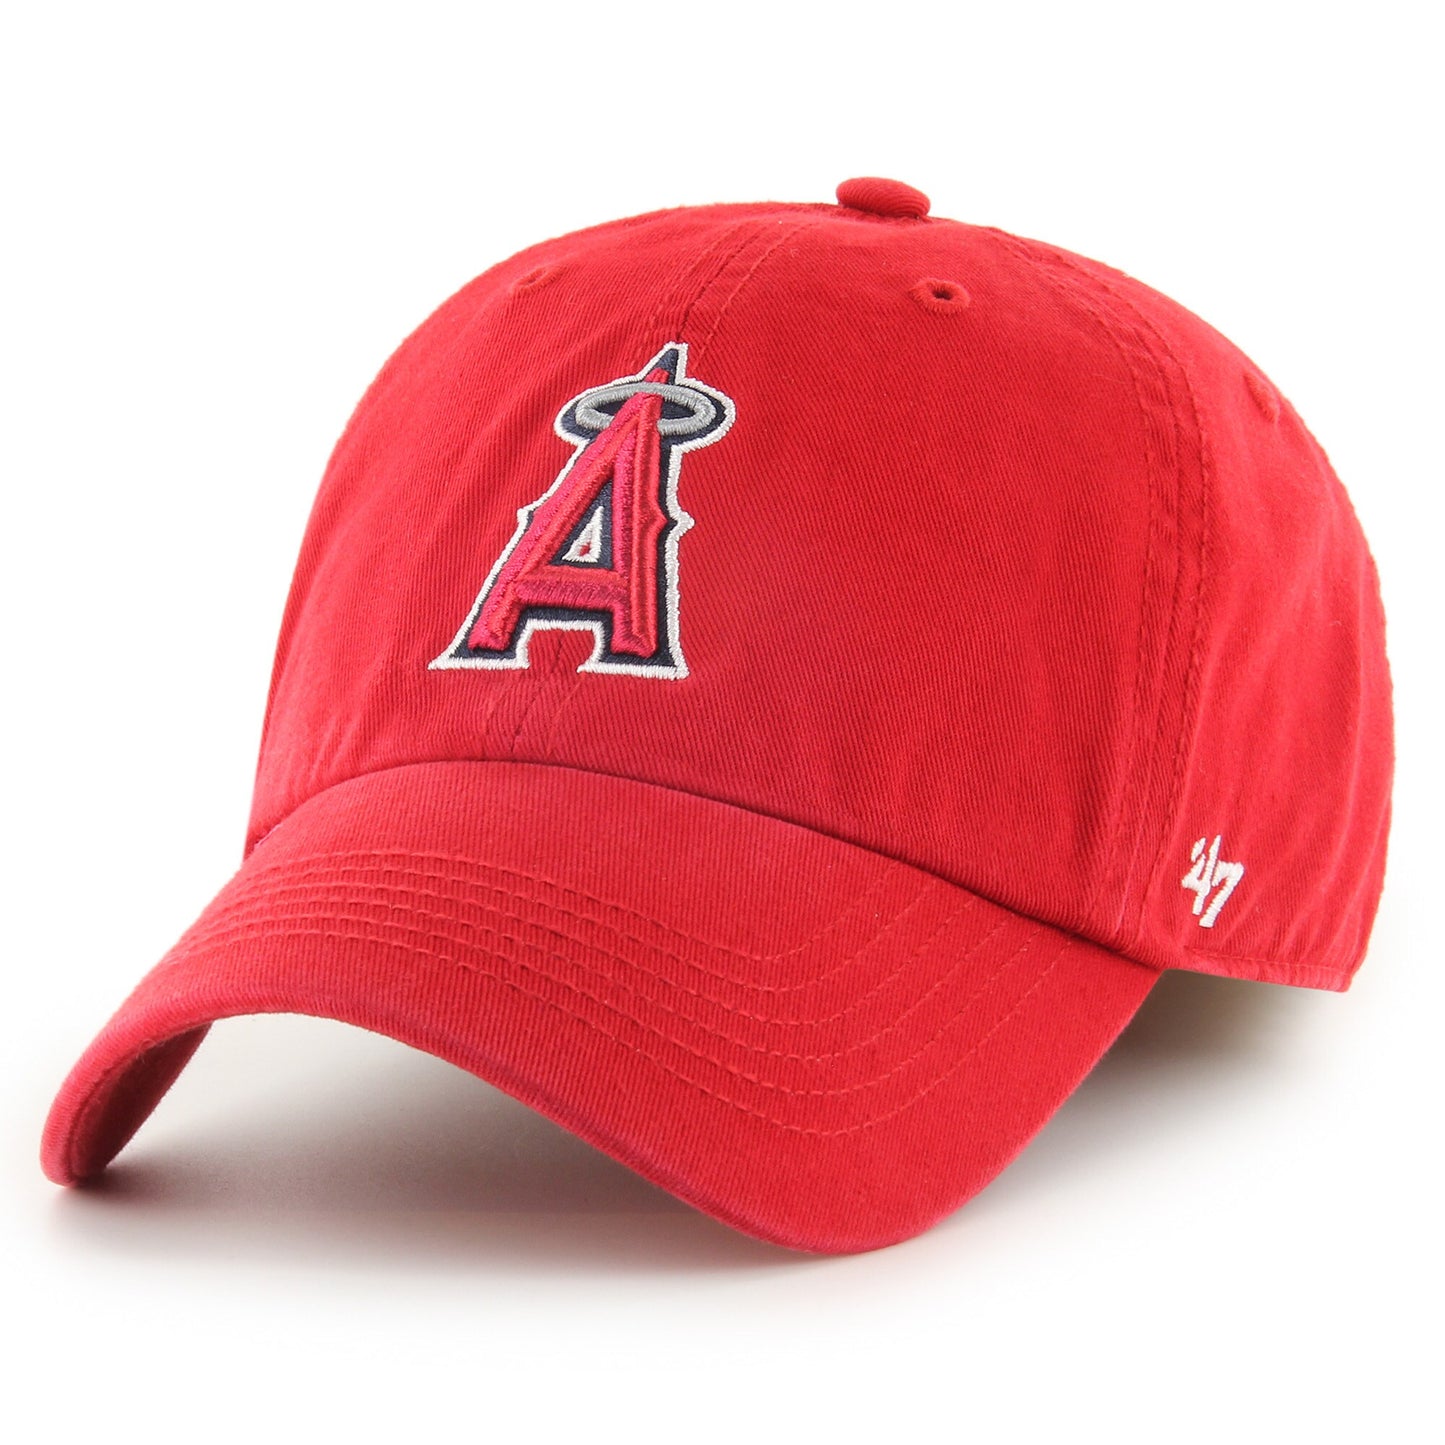 Los Angeles Angels '47 Franchise Logo Fitted Hat - Red